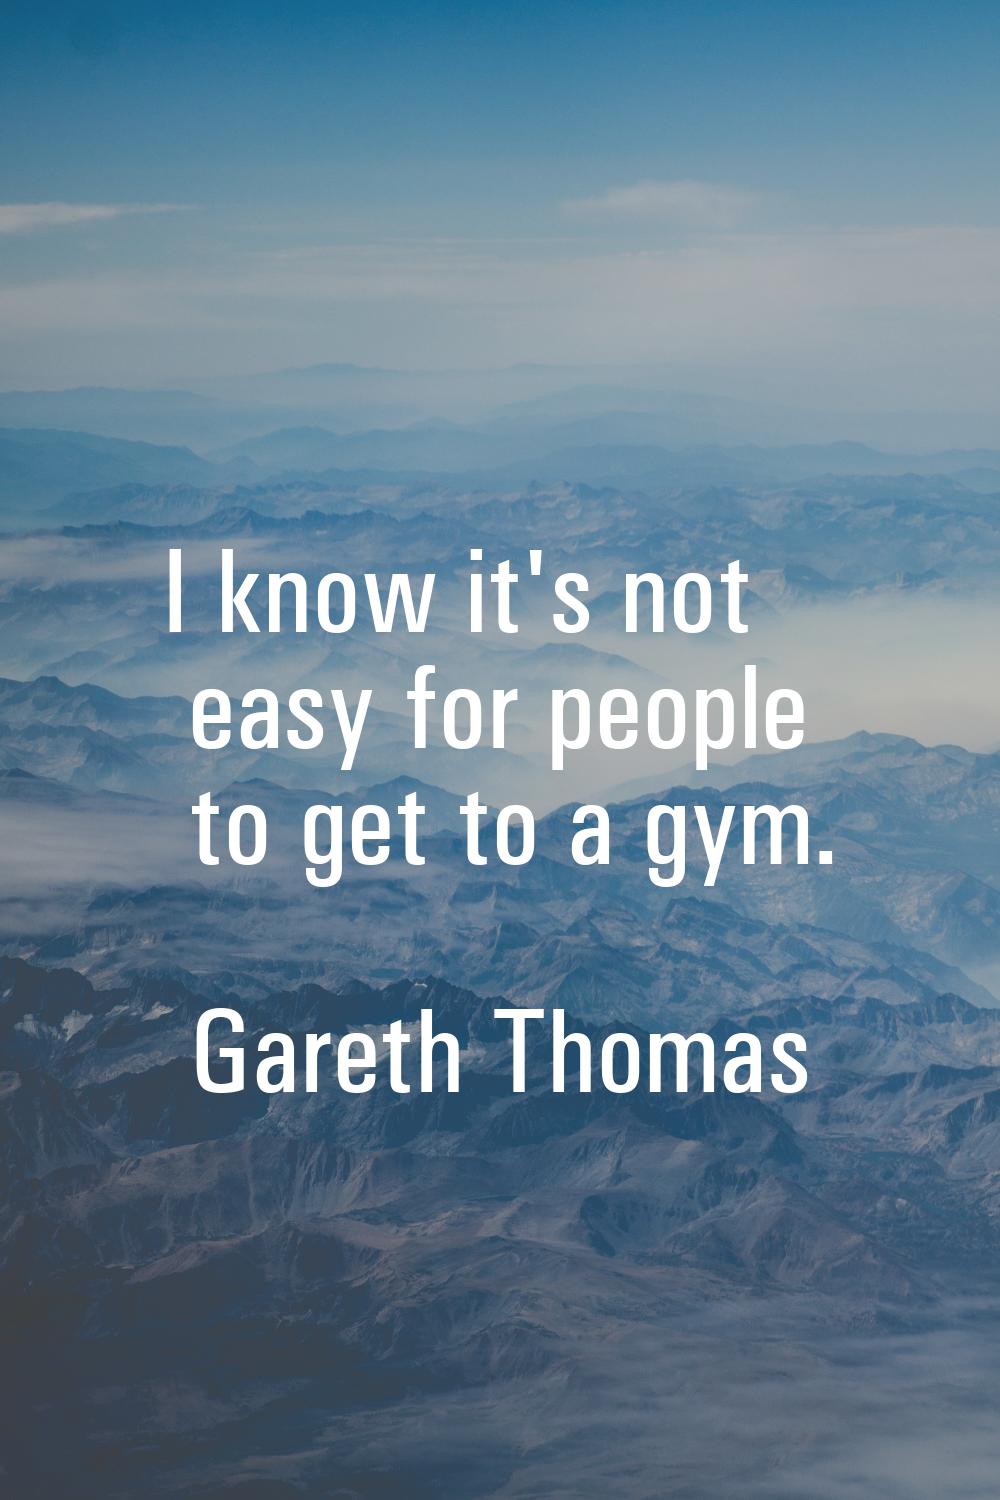 I know it's not easy for people to get to a gym.